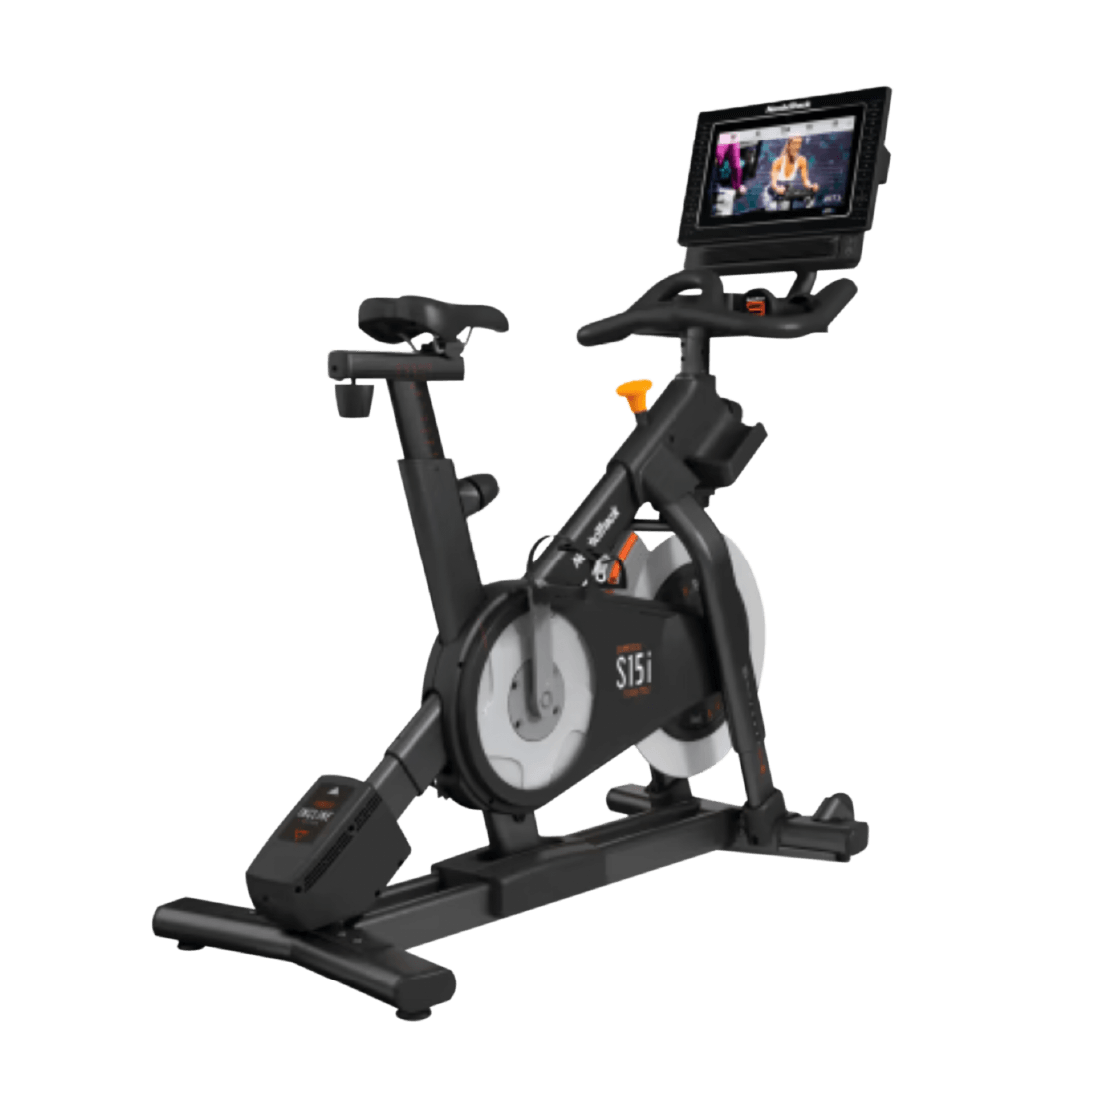 Compare freebeat bikes with Nordic Track S15i Studio Bike. Immersive cardio and artist generated interactive virtual workout stages. The most connected home exercise bike. Cycling, strength training, cardio, and more, experience Lit Bike is features: Auto